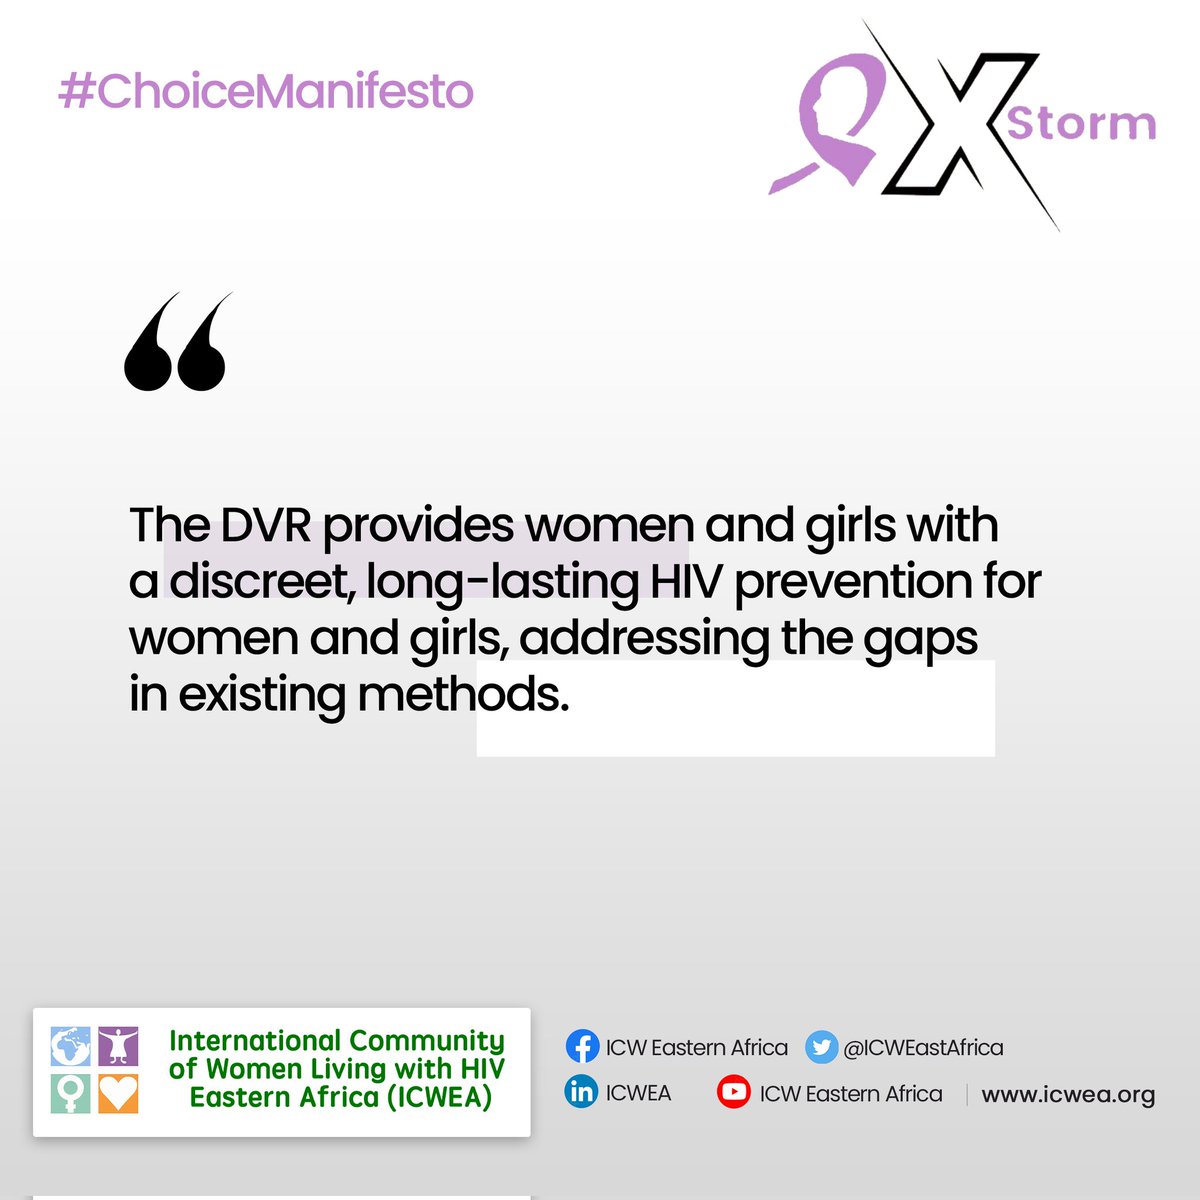 The Daprivine Vaginal Ring has come with the ultimate solution to prevent AGYWs from contracting the HIV/AIDS virus more over discreetly #HIVPreventionbychoice #Choicemanifesto @ICWEastAfrica @HIVpxresearch @GovUganda @MinofHealthUG @Winnie_Byanyima @UNAIDS